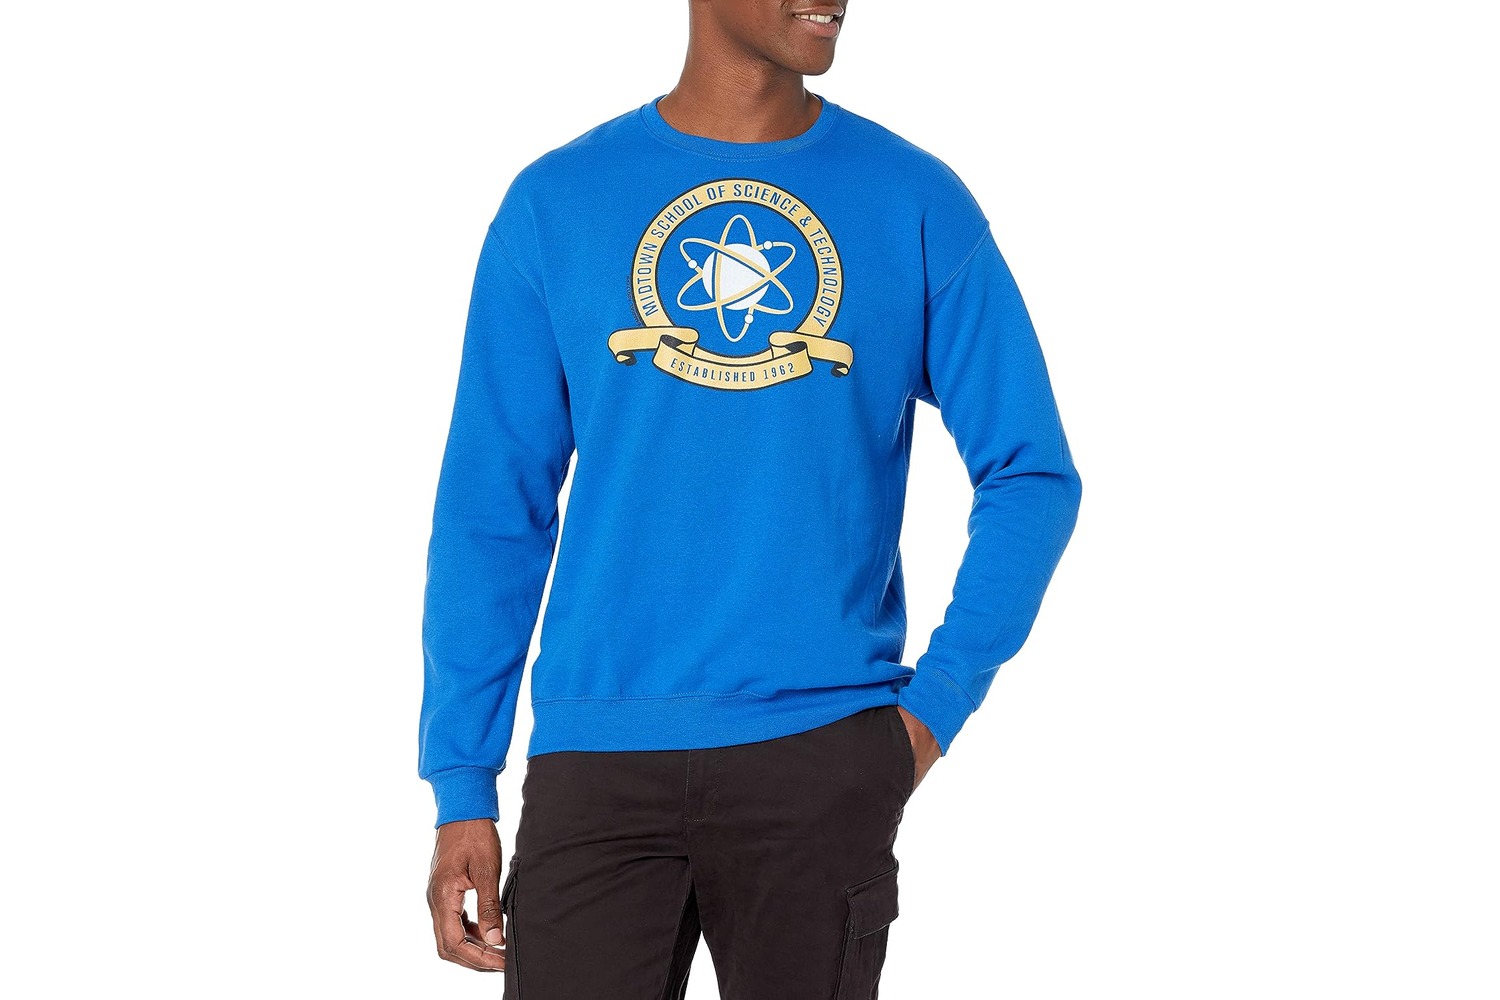 9 Best Midtown School Of Science And Technology Sweatshirt for 2024